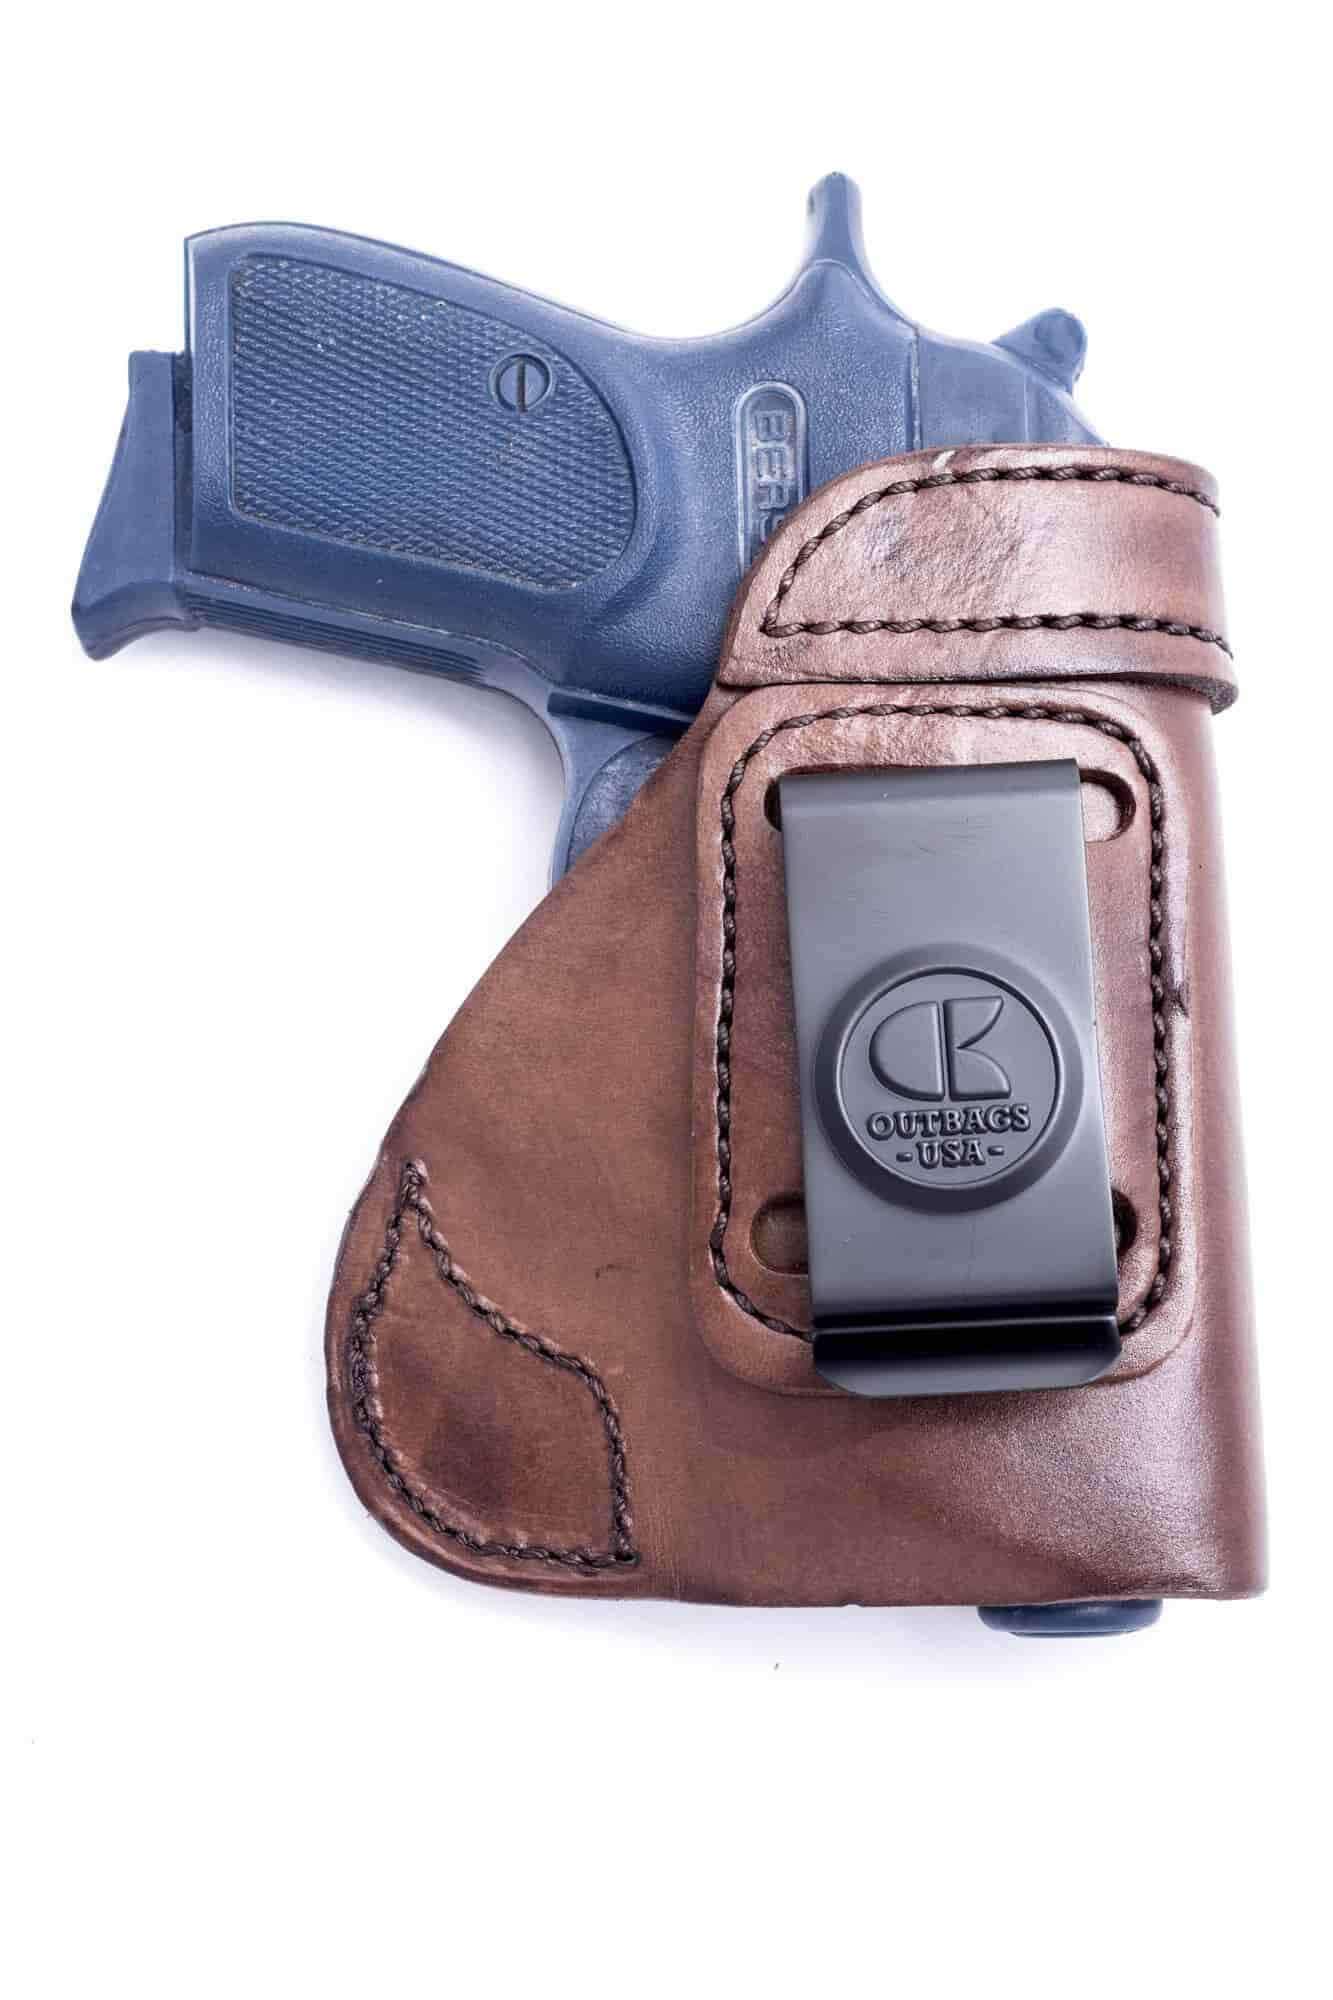 Custom Kydex Holsters For Women Concealed Carry – Southern Bullets